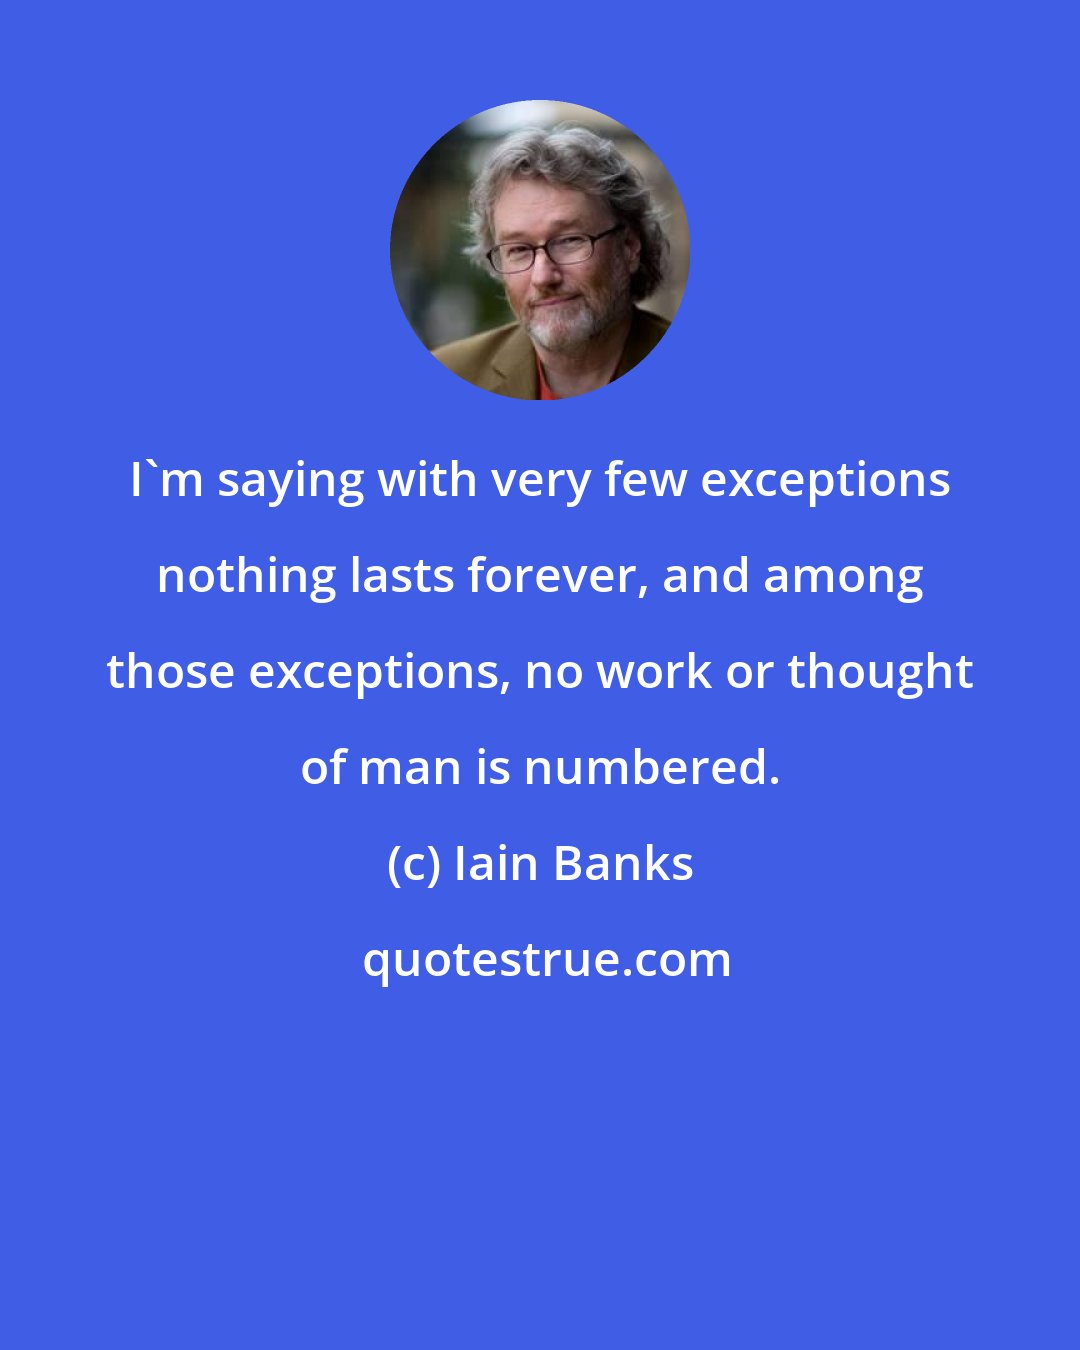 Iain Banks: I'm saying with very few exceptions nothing lasts forever, and among those exceptions, no work or thought of man is numbered.